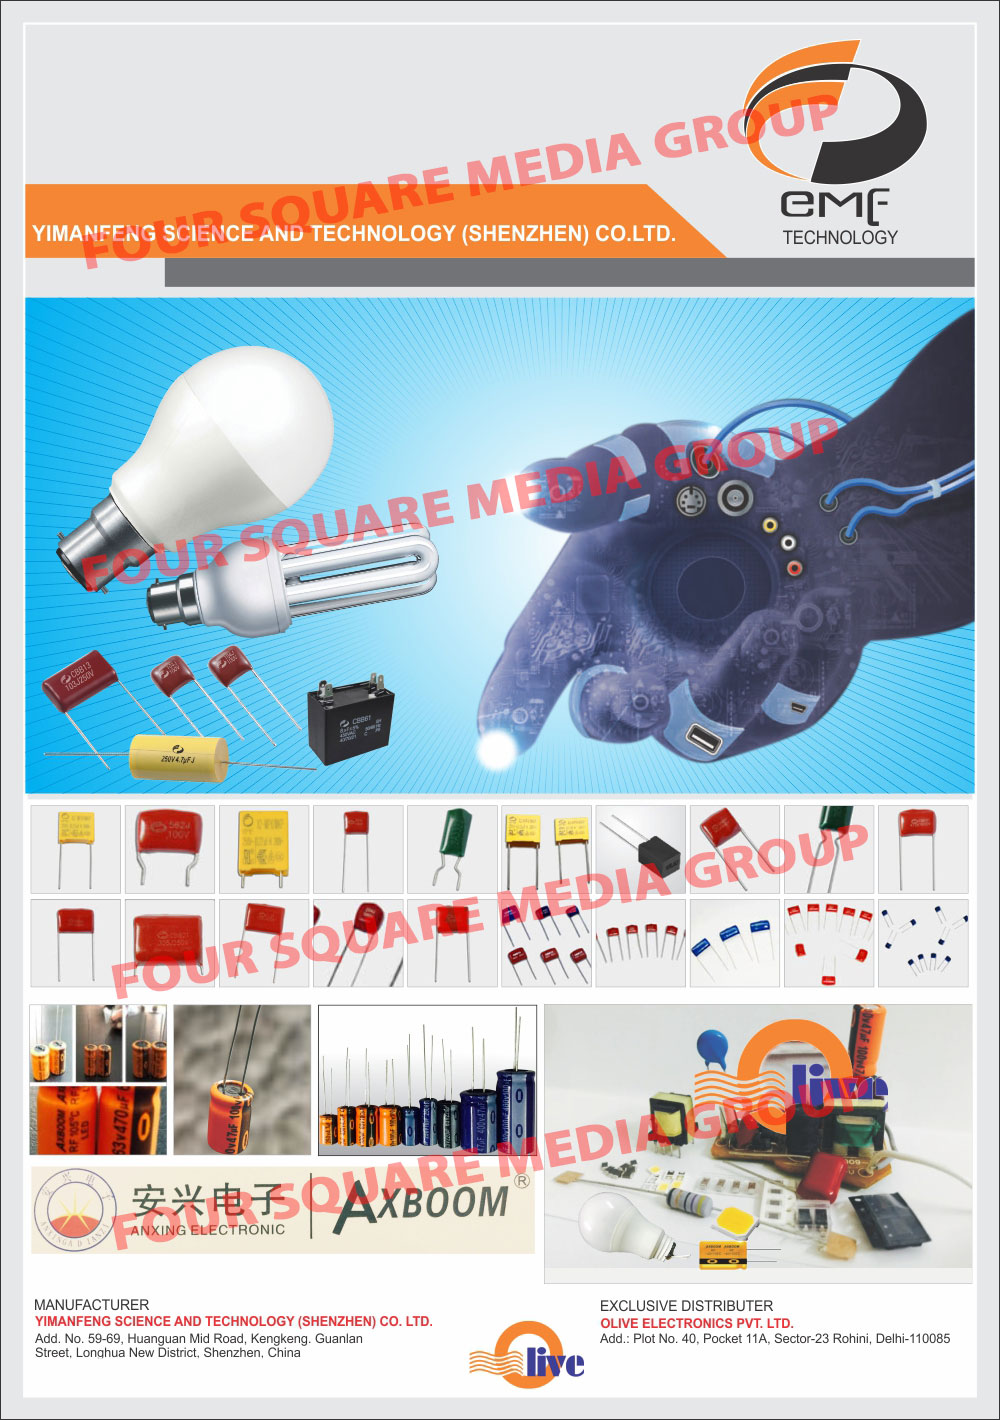 Electrolytic Capacitors, Radial Type Capacitors, Snap In Type Capacitors, Screw Type Capacitors, Smd Type Capacitors, Epcos Capacitors, LED Lighting Capacitors, Lighting Electronic Components, Aluminum Electrolytic Capacitors, Radial Type Capacitor for Inverters, LED Drivers, Ac Power Capacitors, LED Bulb Housings, LED Chip for LED Bulbs